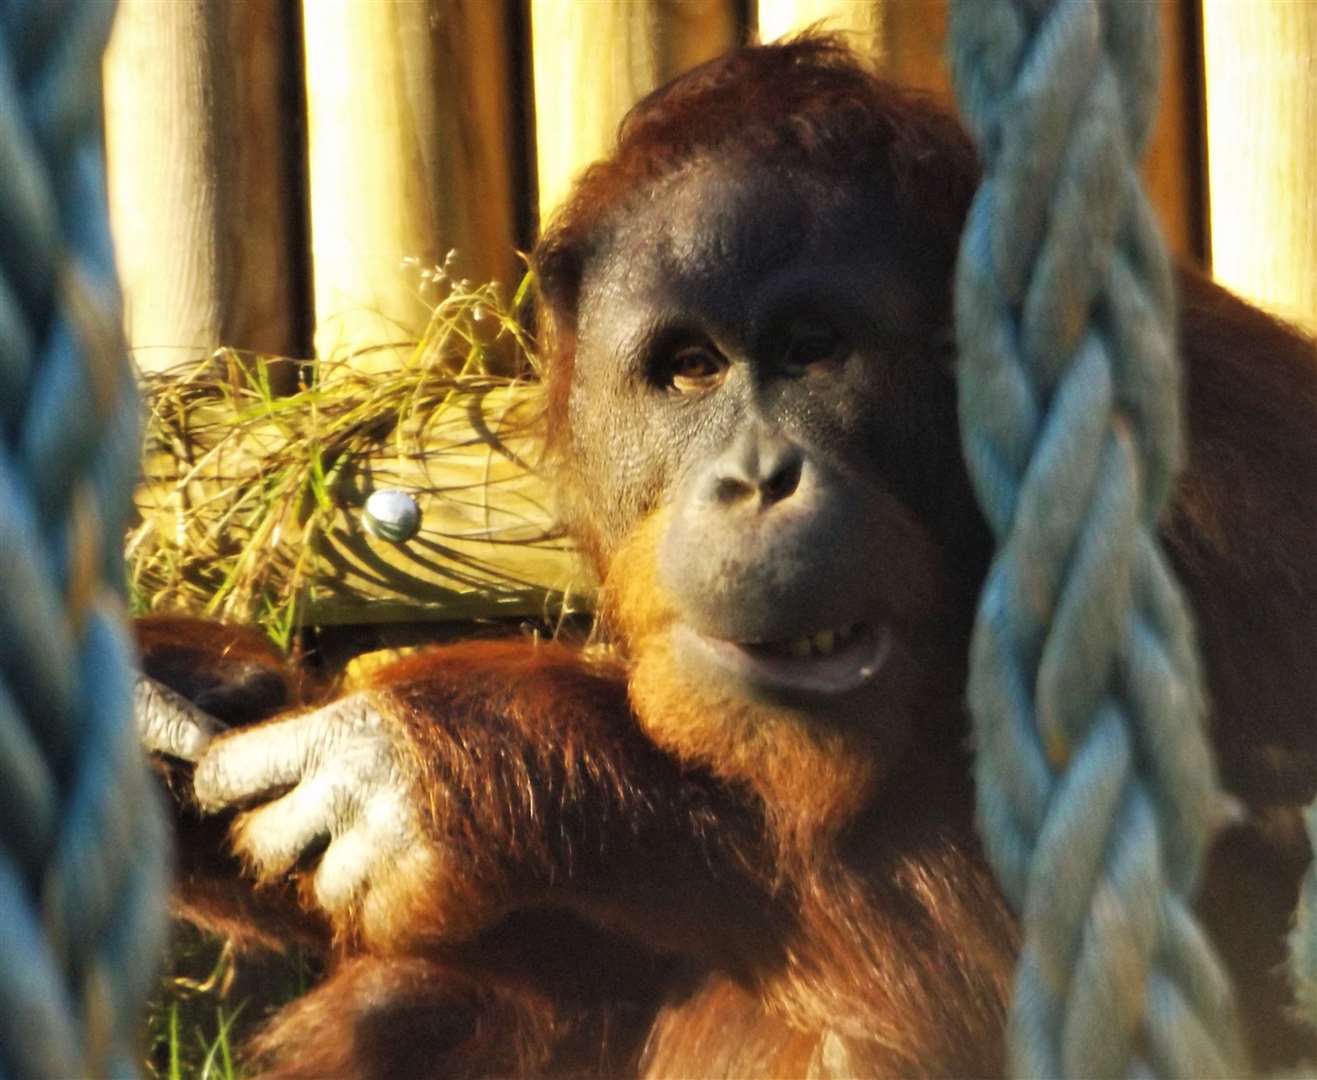 Orangutans have recently arrived at the park... they won't be seeing any visitors for some time